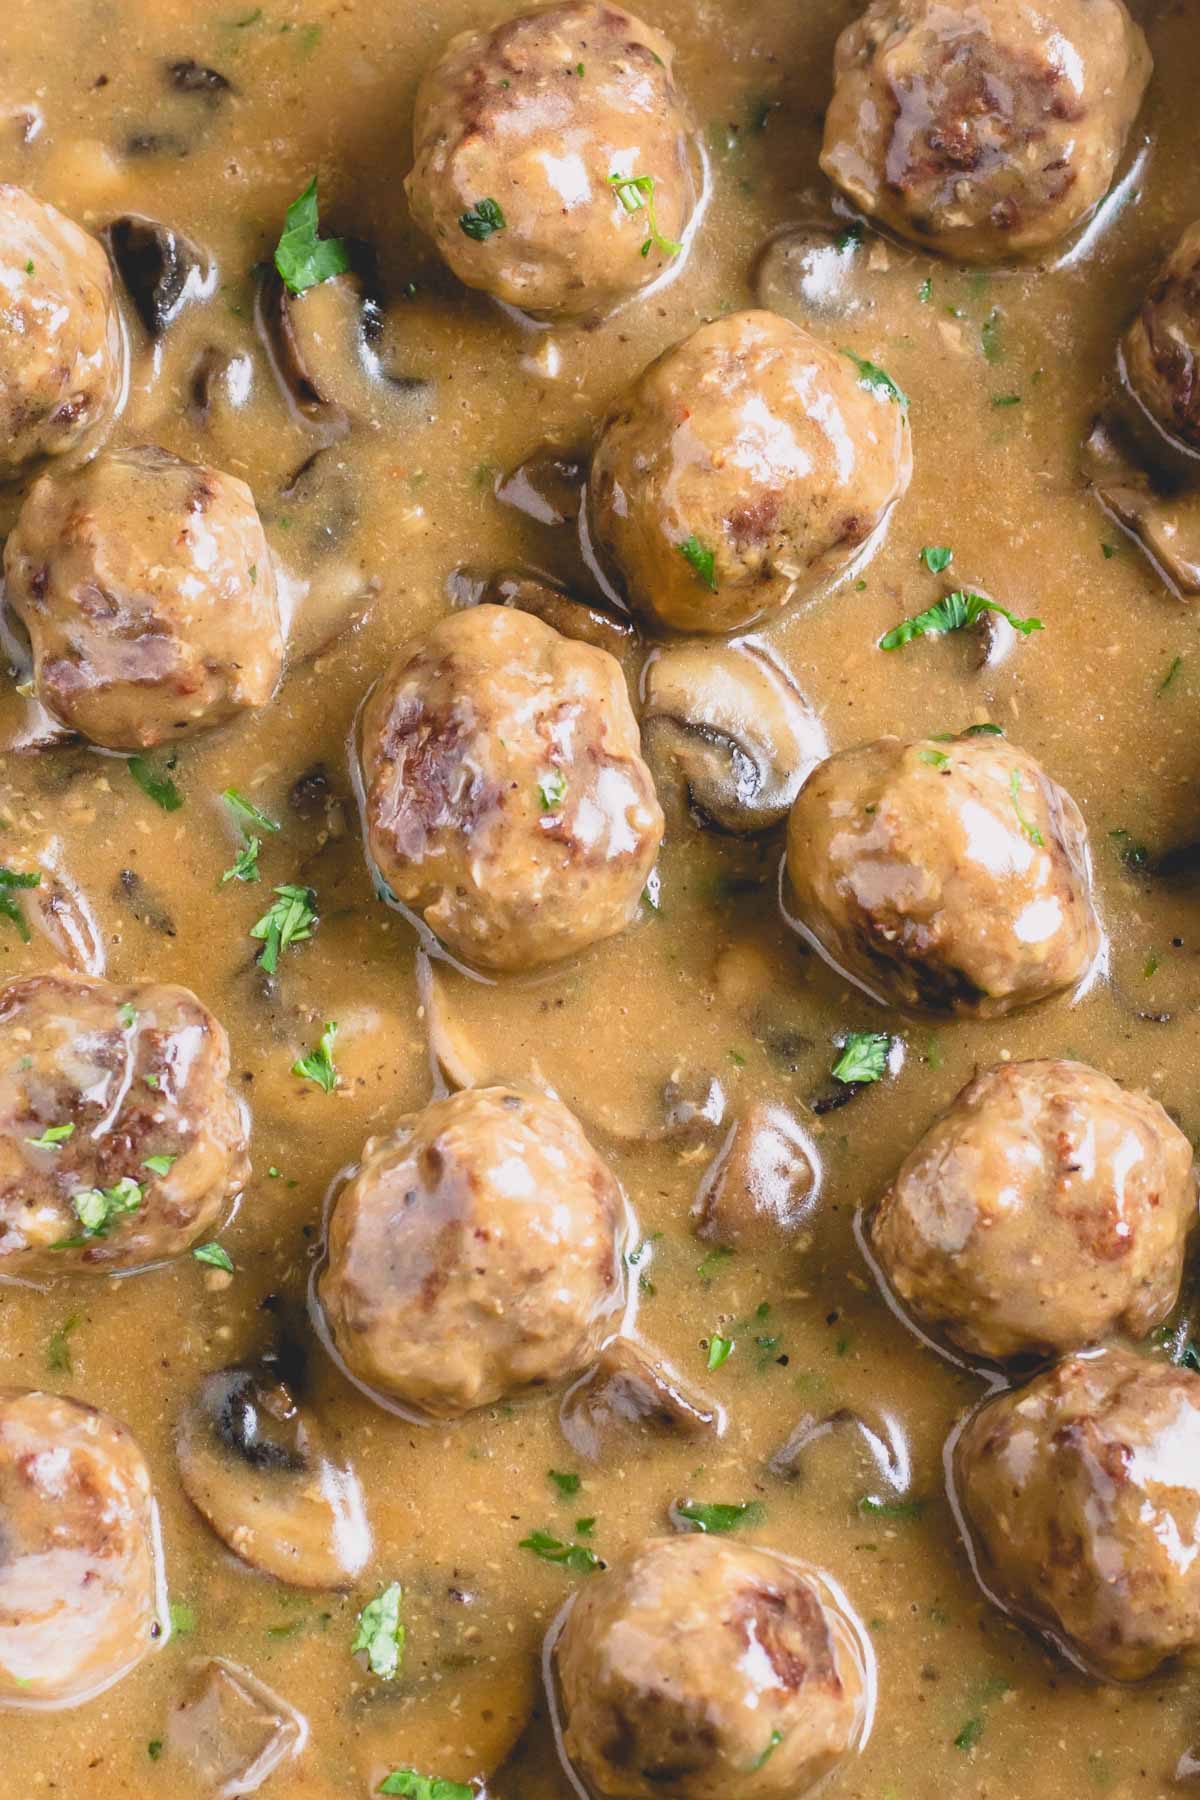 Beef meatballs in mushroom gravy topped with green herbs.